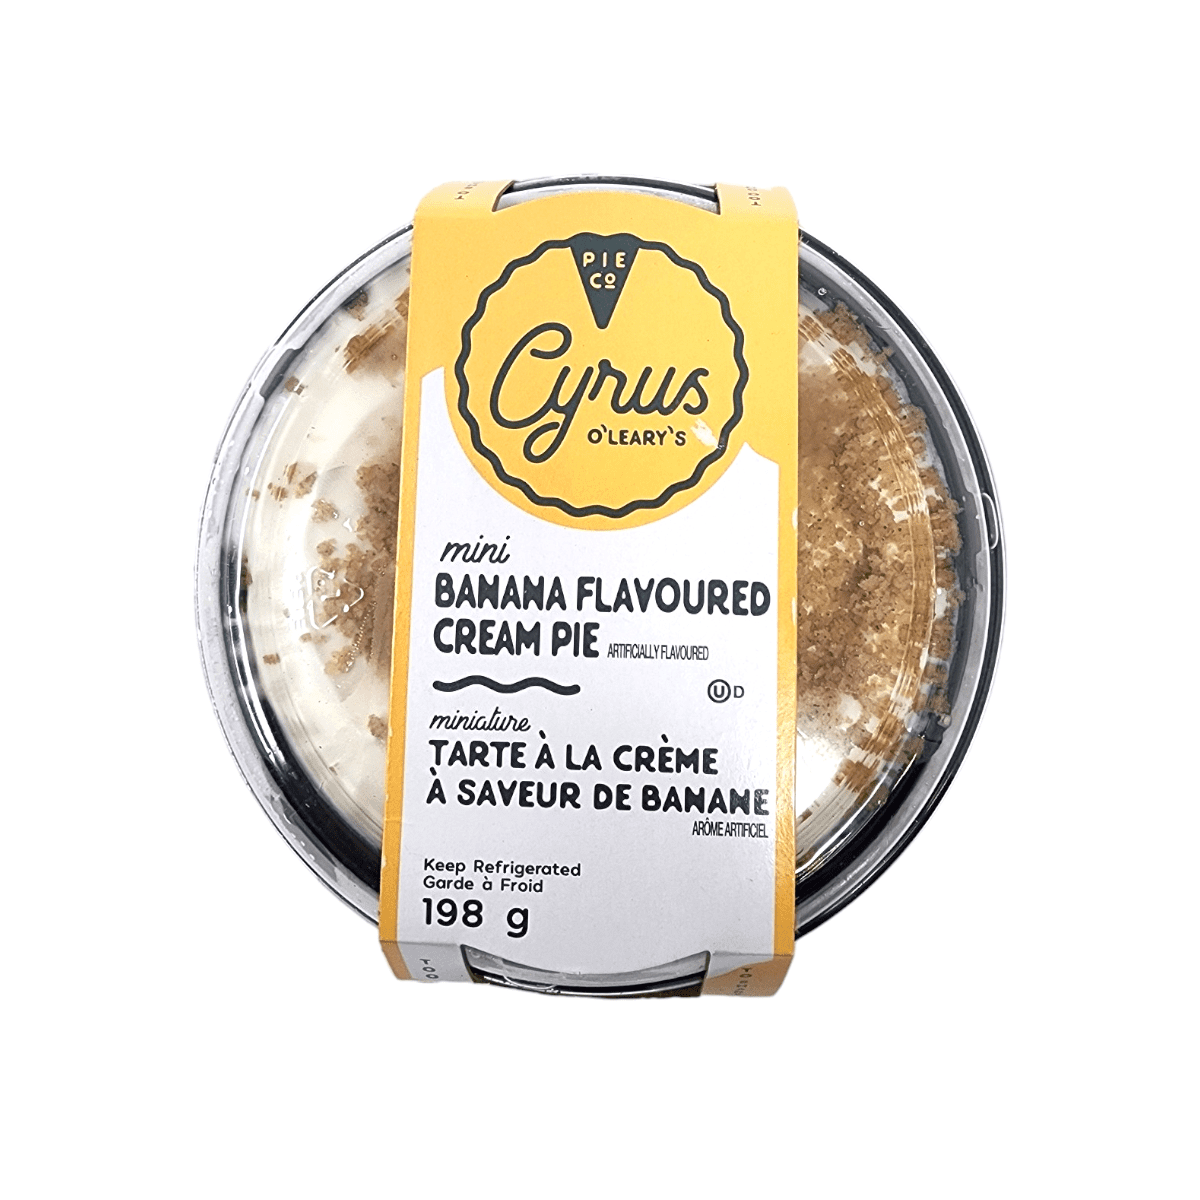 Cyrus O’Leary’s Banana Flavoured Cream Pie (198g)